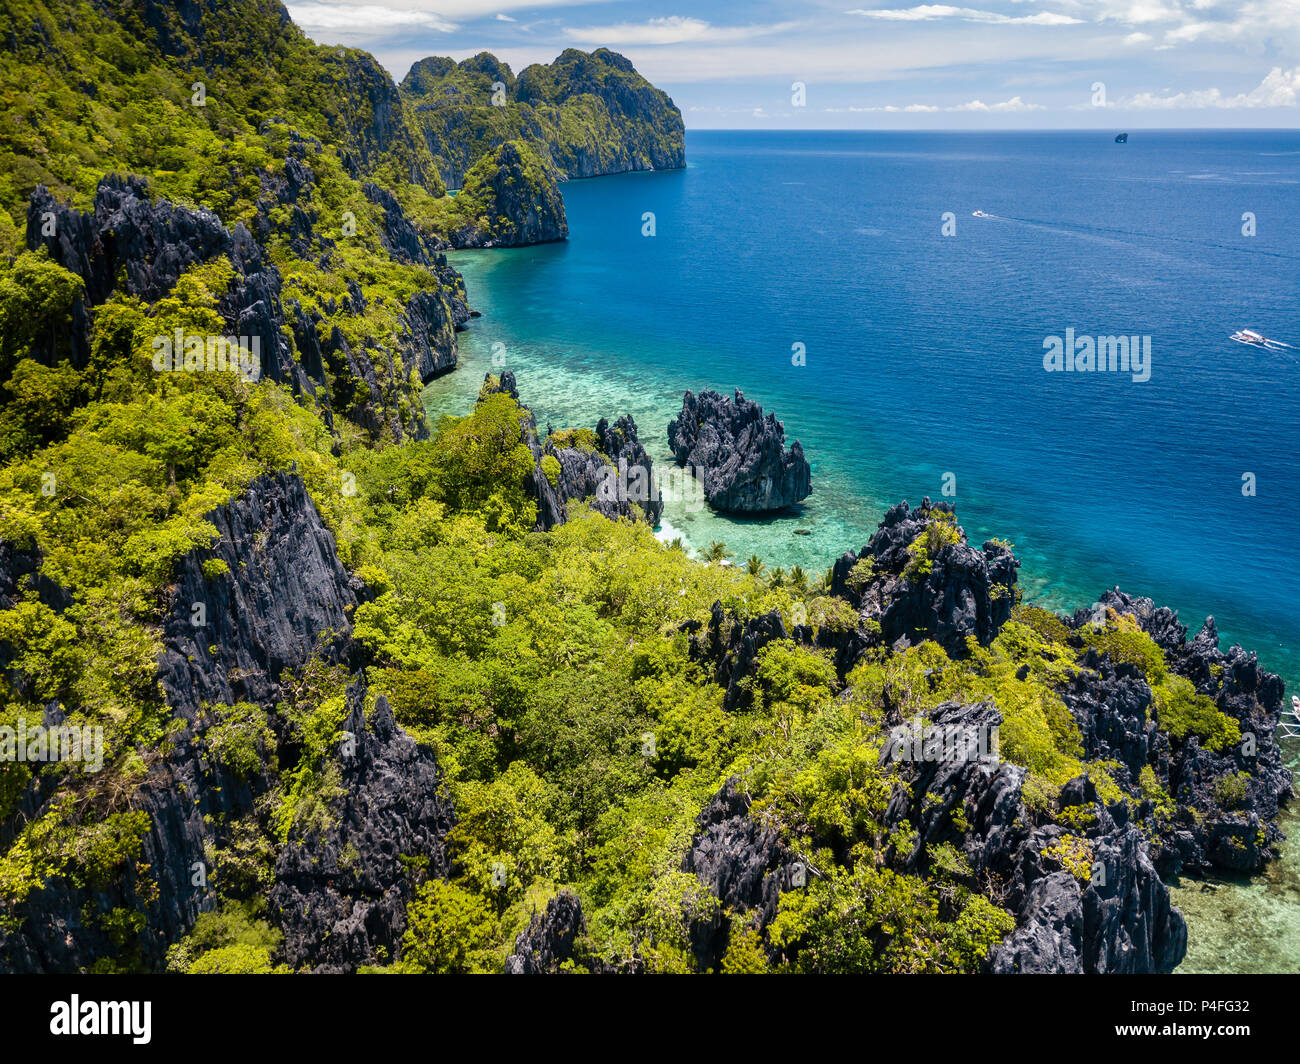 Aerial drone view of spectacular limestone cliffs, jungle, sandy beaches surrounded by coral reef Stock Photo